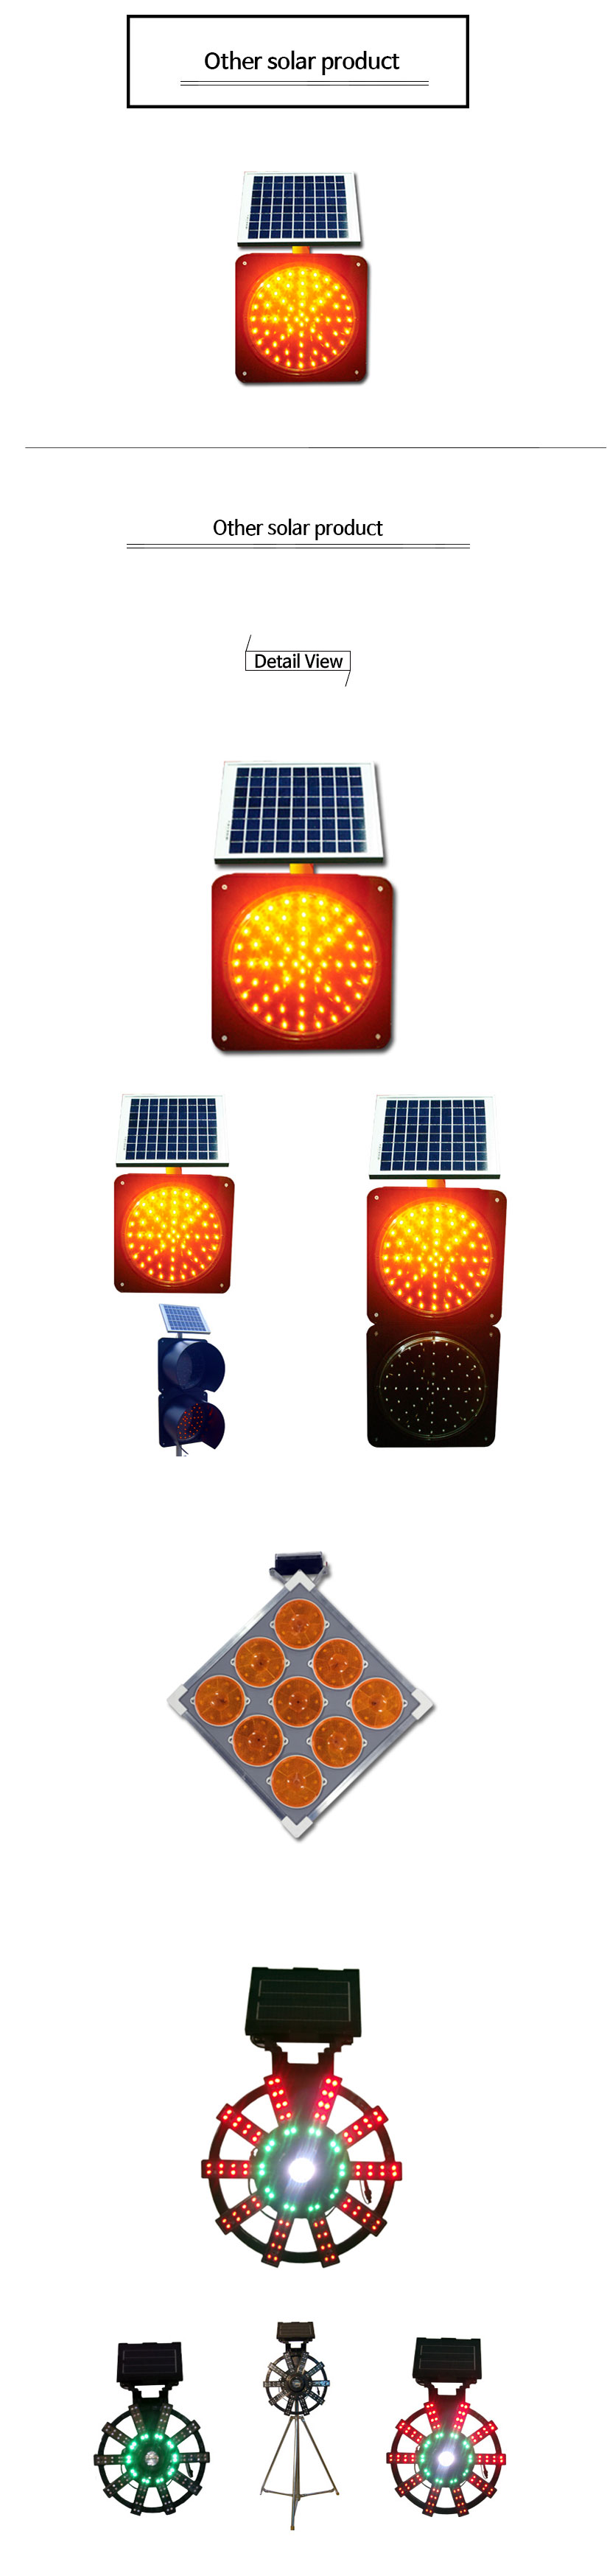 Other-solar-product.jpg